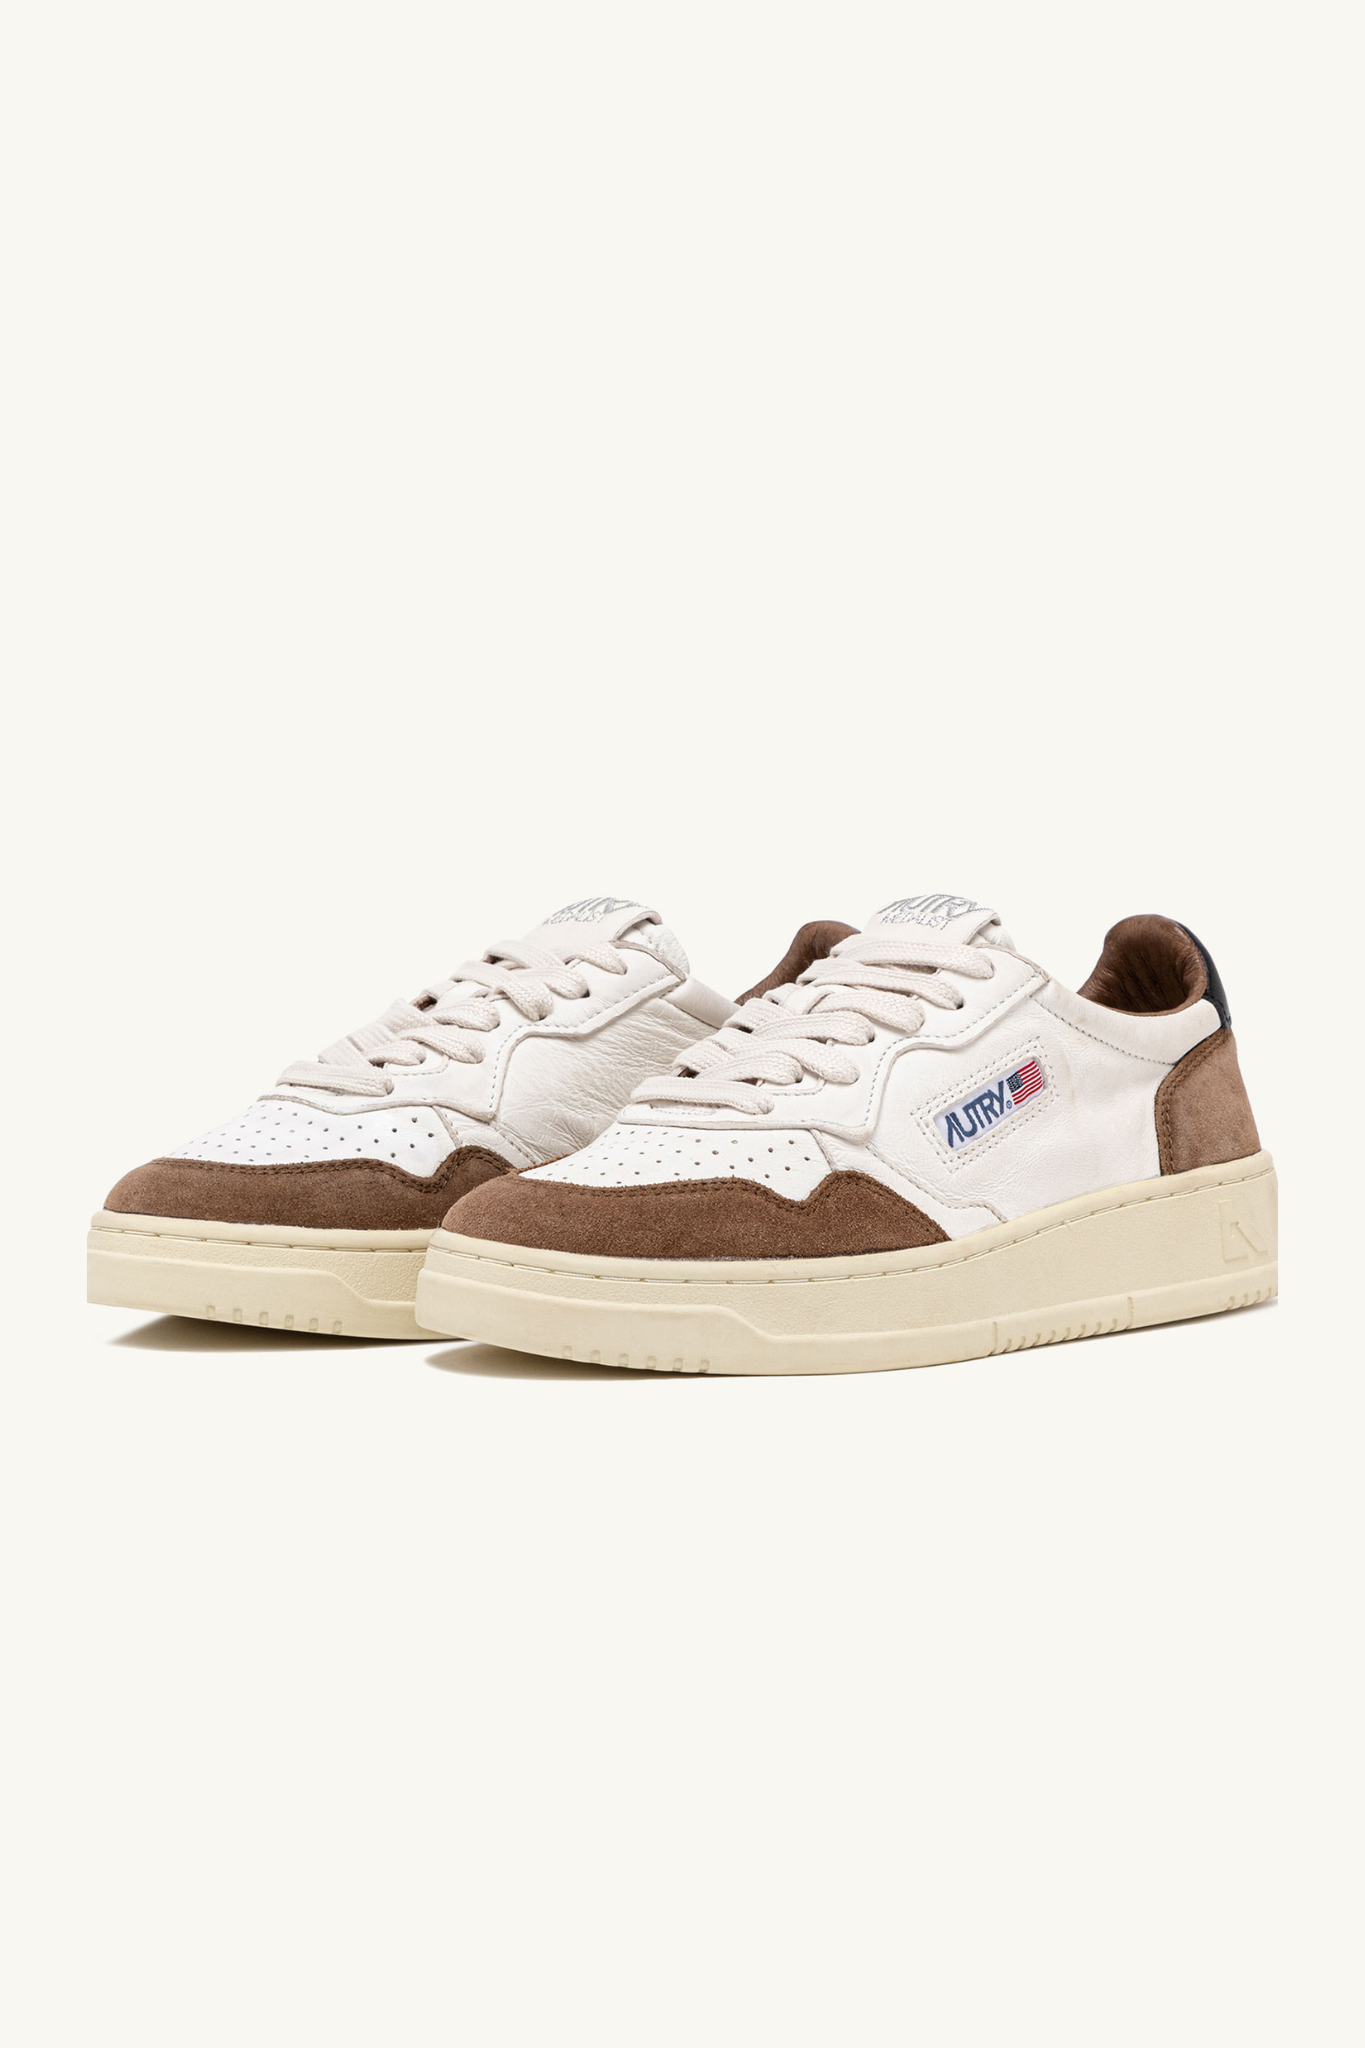 AULW-GS21 - MEDALIST LOW SNEAKERS IN SUEDE POWDER AND SOFT GOATSKIN COLOR WHITE AND BROWN